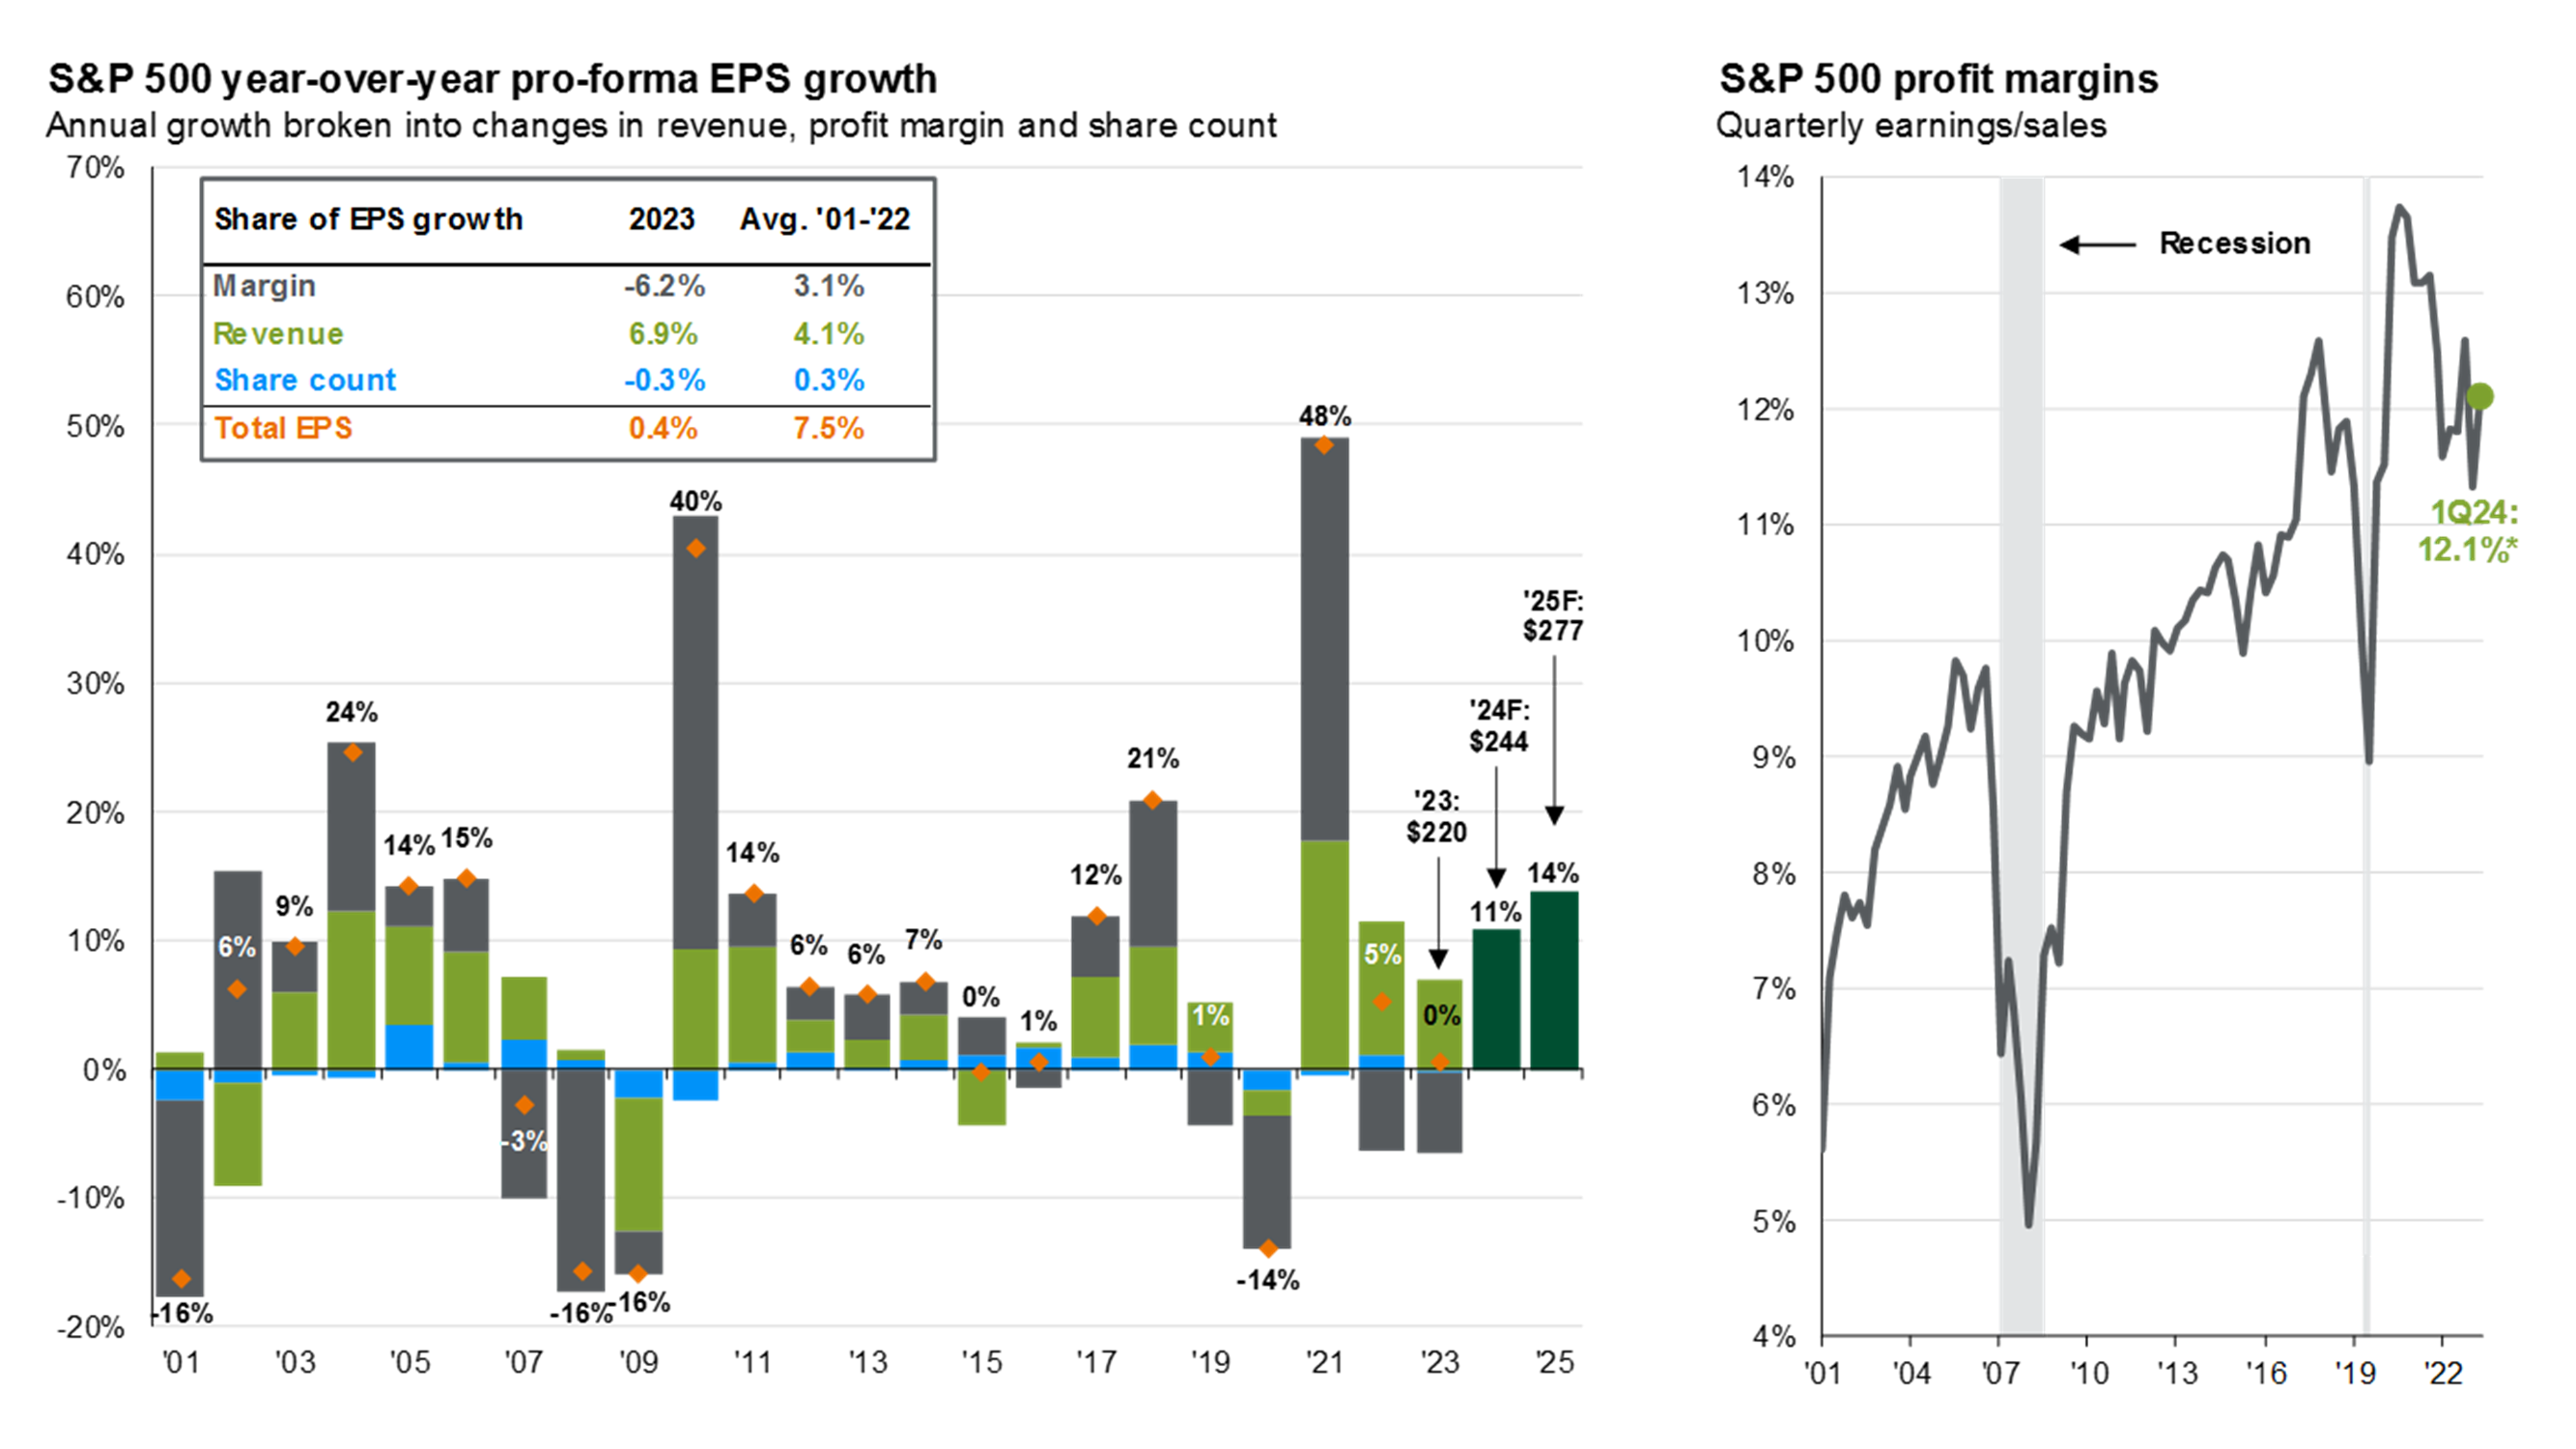 Corporate earnings and sources of earnings growth